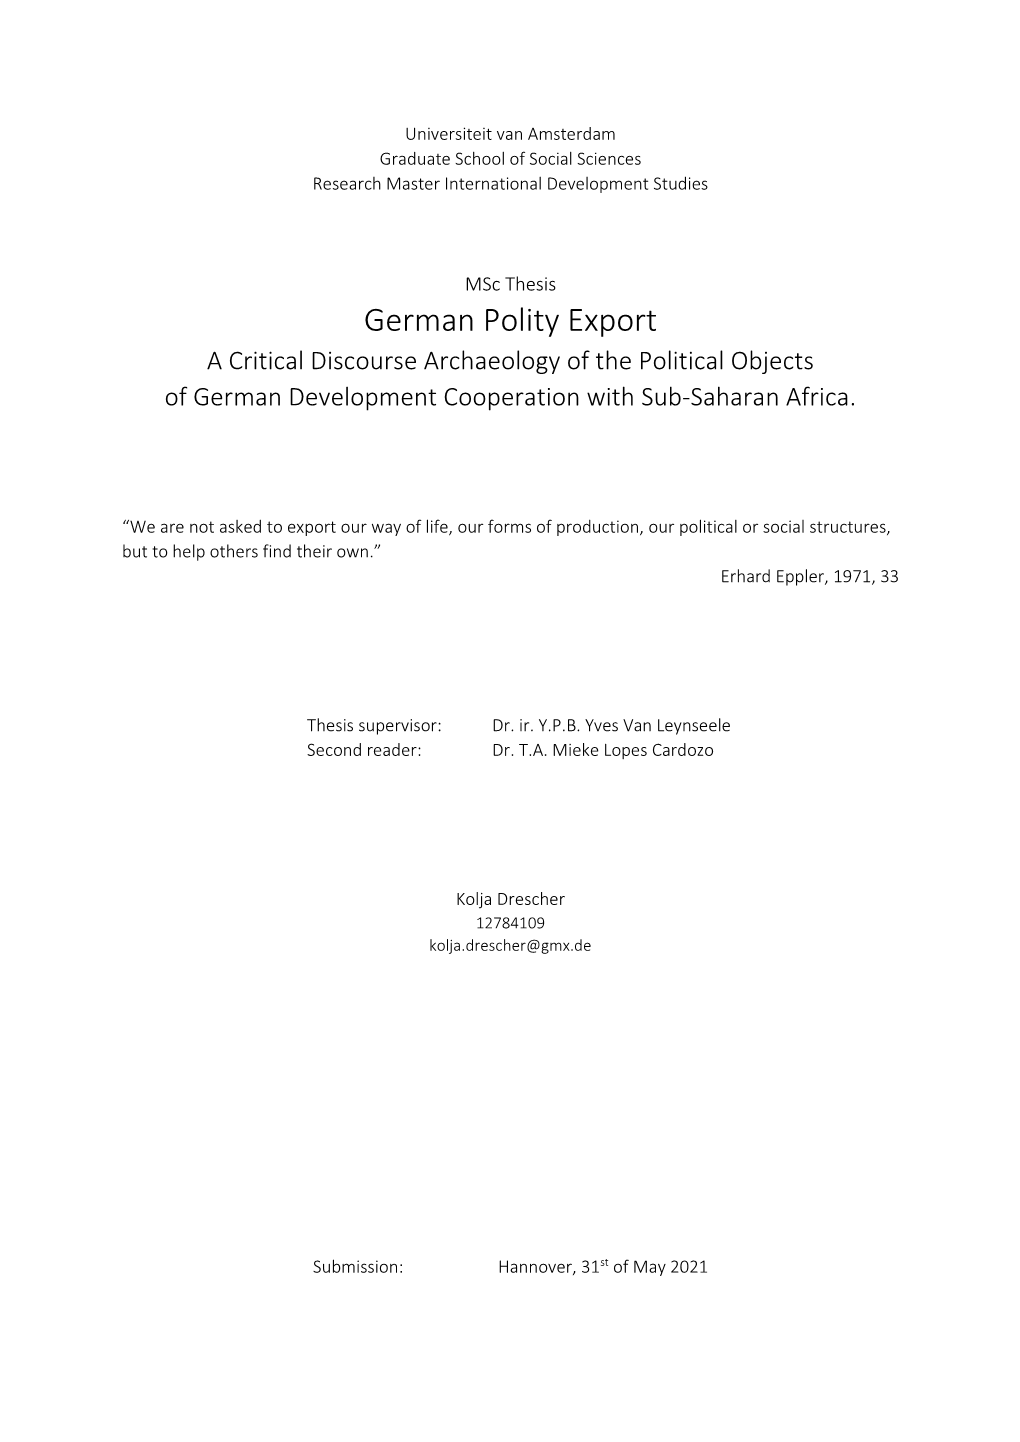 German Polity Export a Critical Discourse Archaeology of the Political Objects of German Development Cooperation with Sub-Saharan Africa